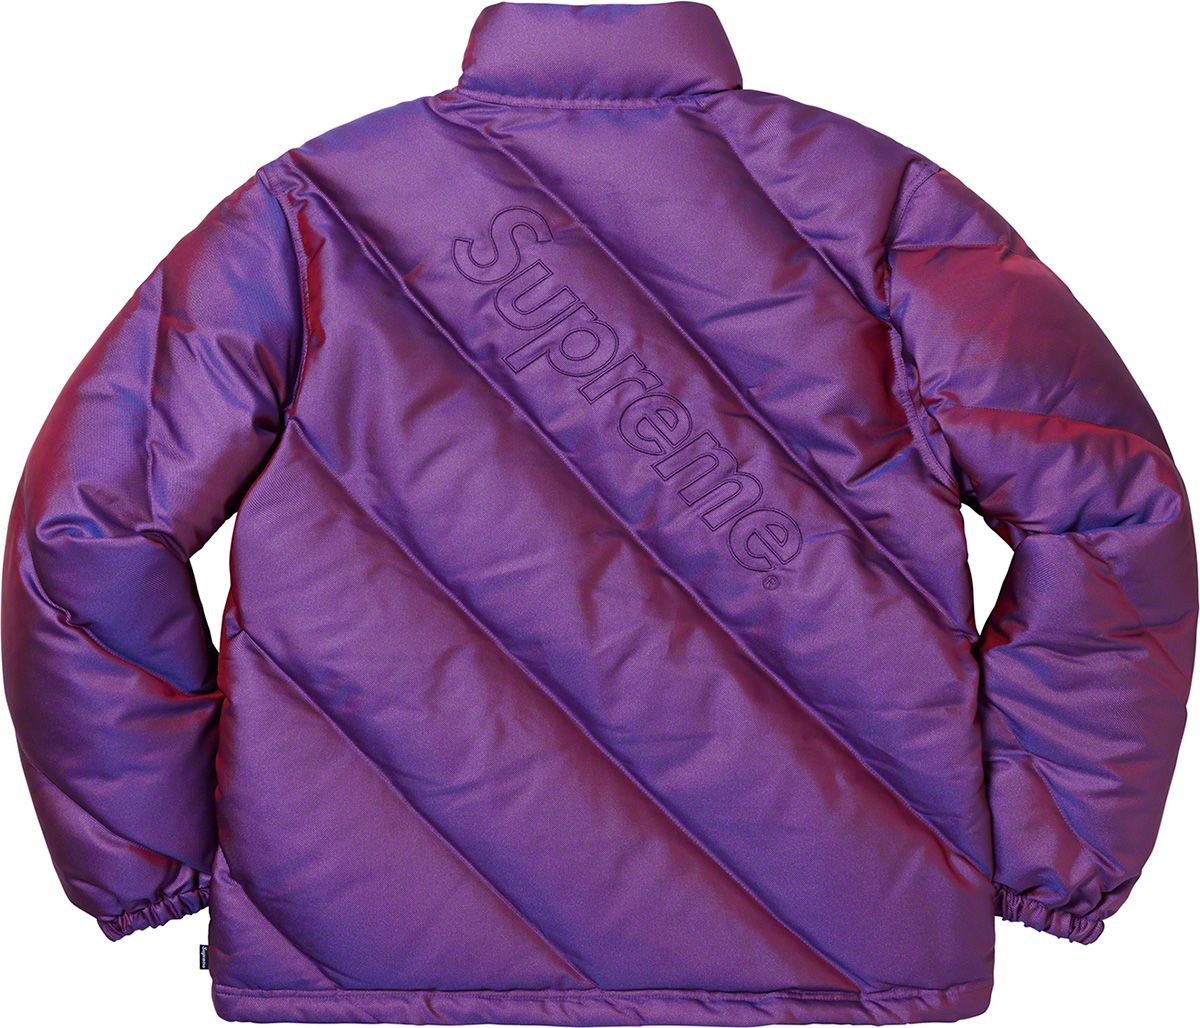 Iridescent Puffy Jacket - Fall/Winter 2019 Preview – Supreme